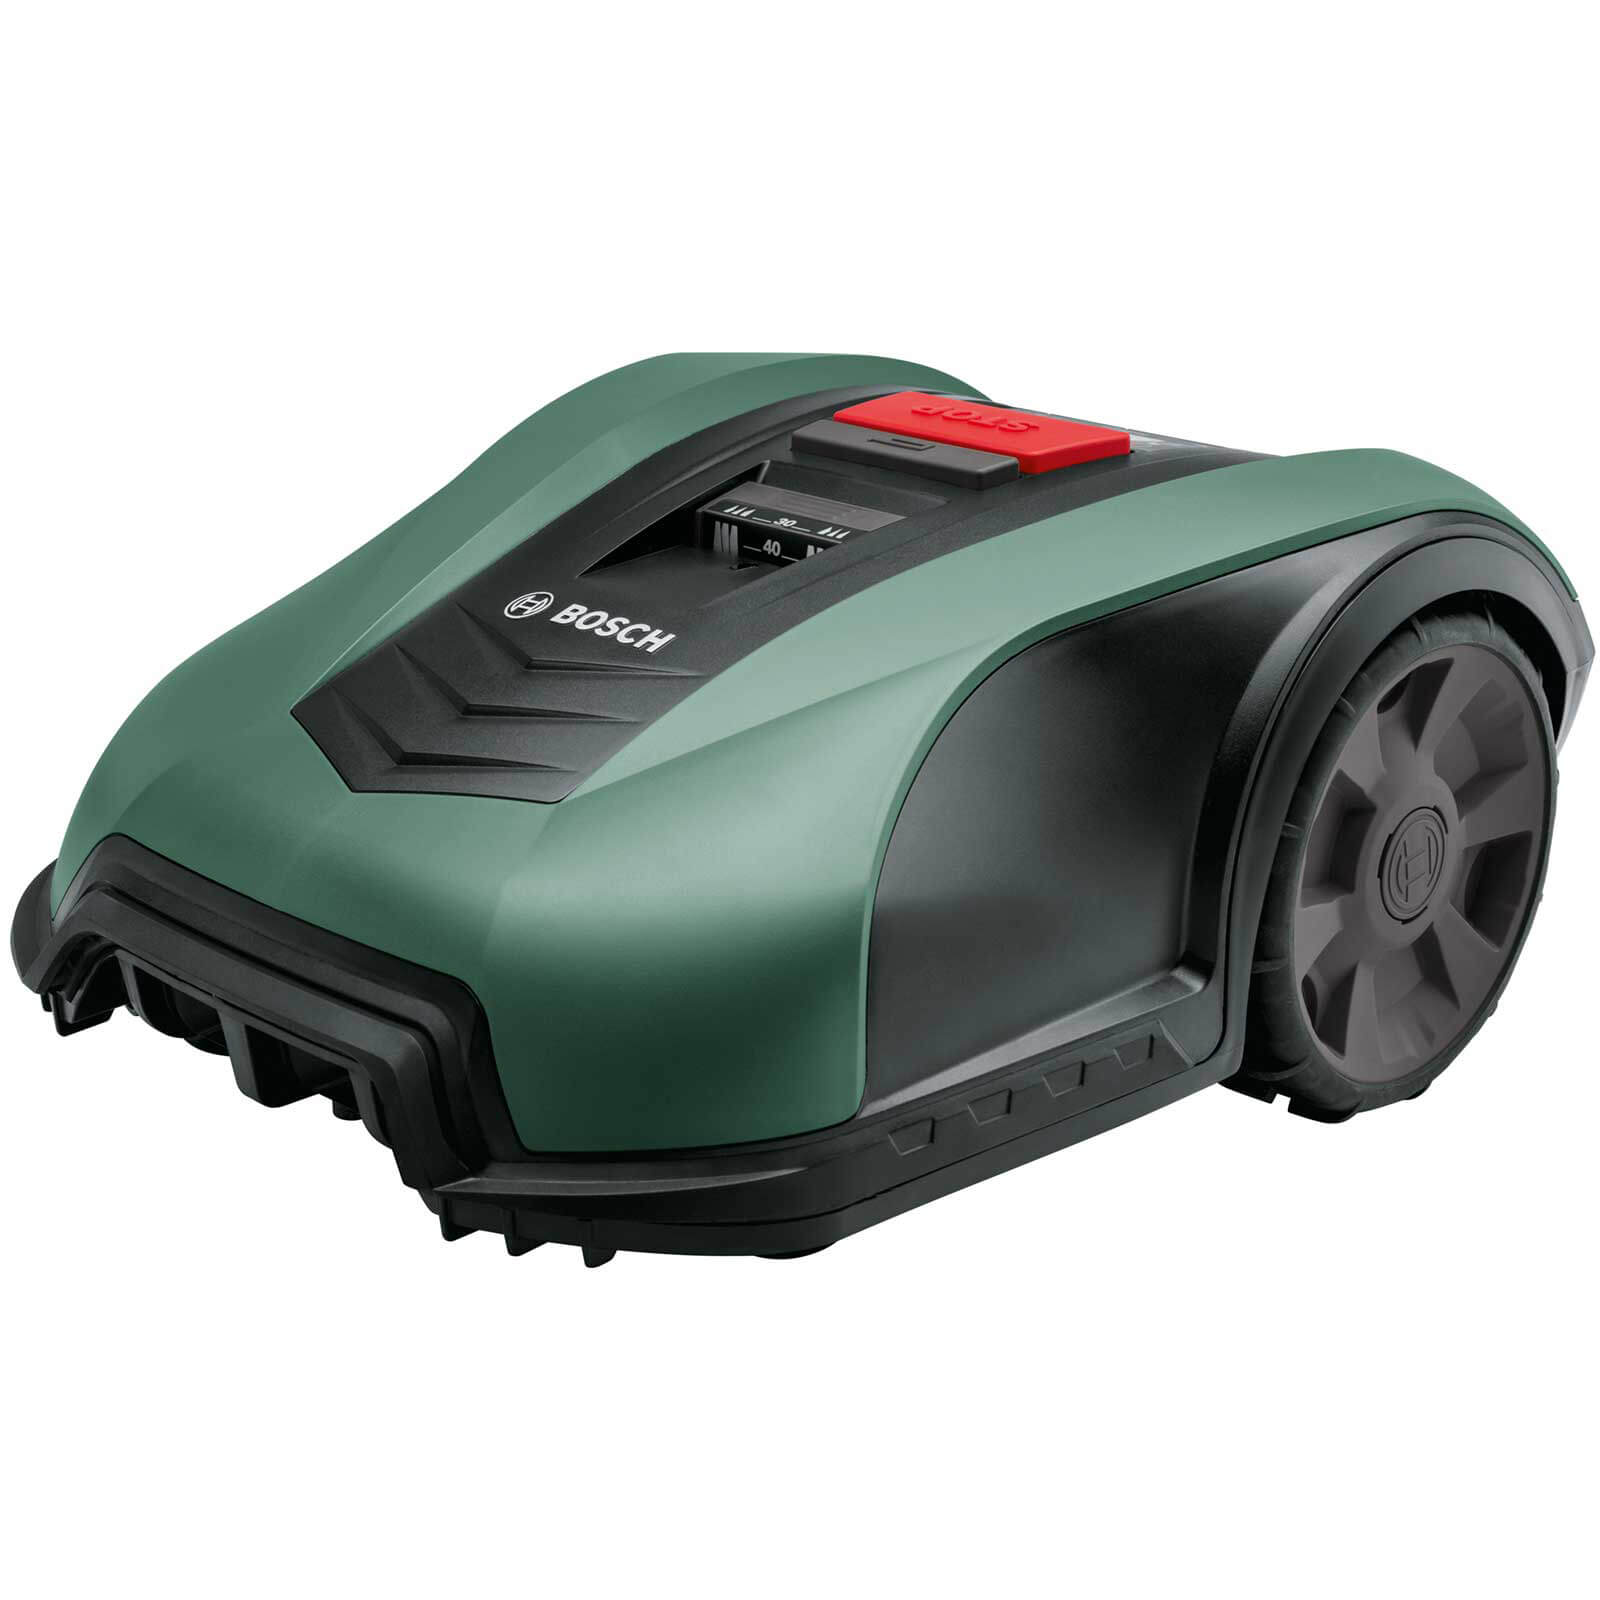 Bosch INDEGO M+ 700 P4A 18v Cordless Smart Robotic Lawnmower 700m2 190mm 1 x 2.5ah Integrated Li-ion Charger